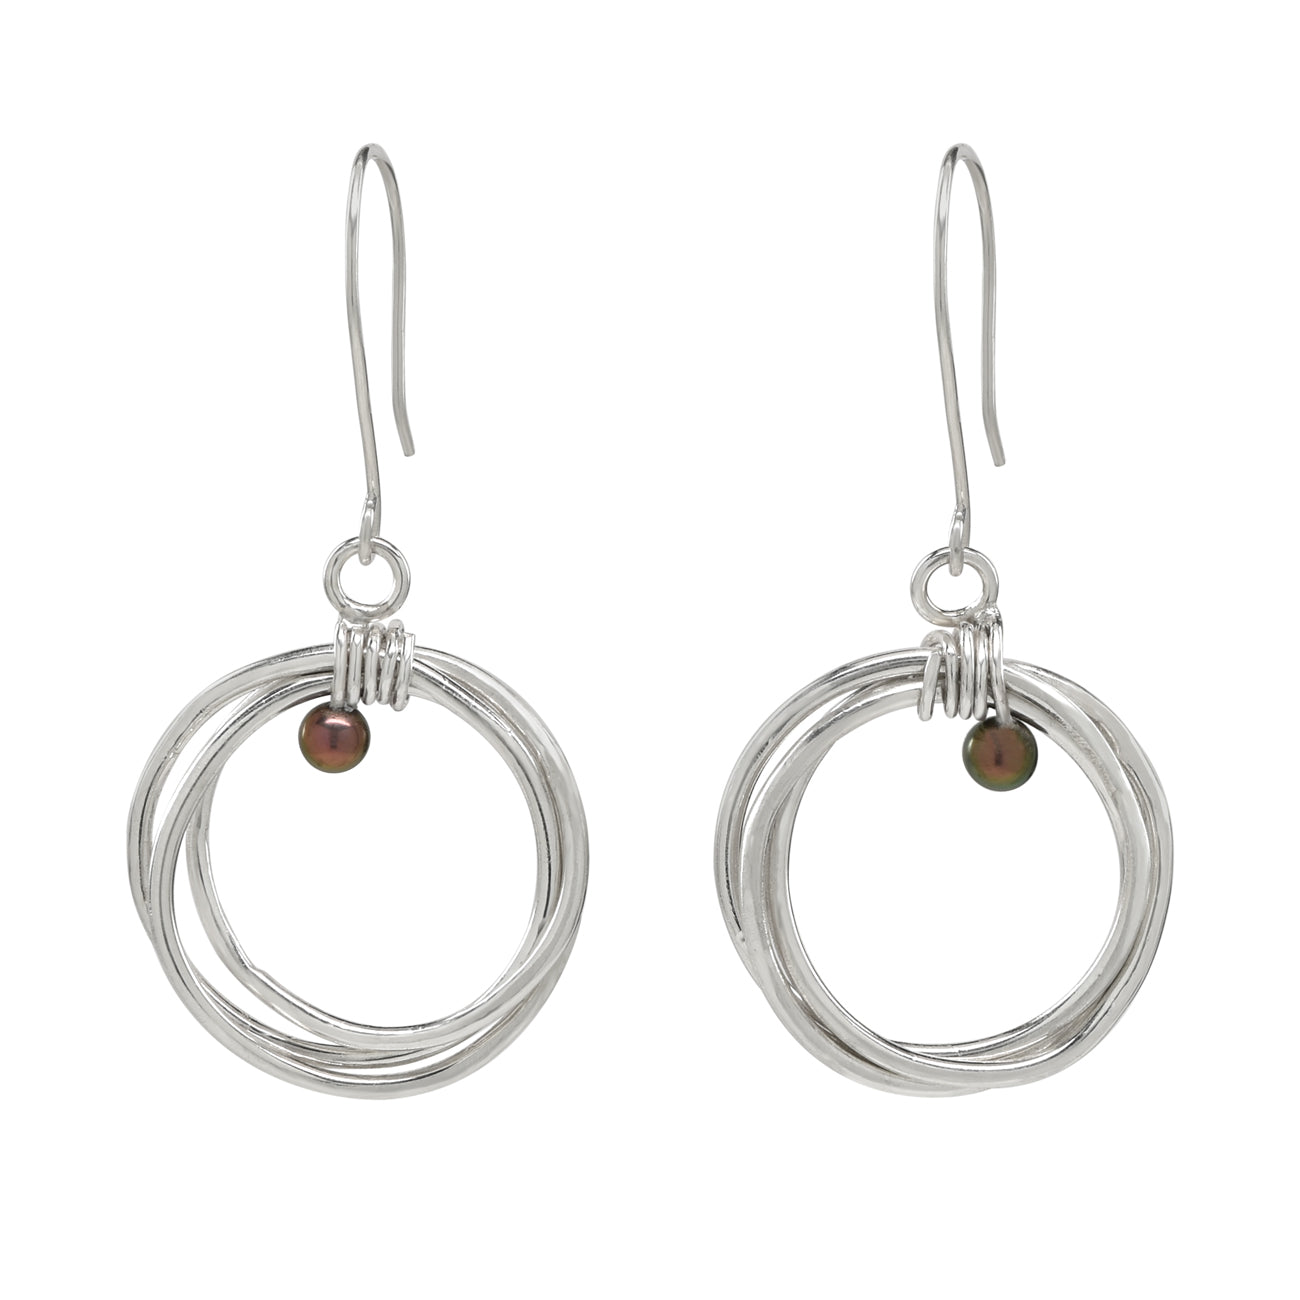 Maven Sterling Silver Mobius Ring Earrings with Peacock Freshwater Pearls